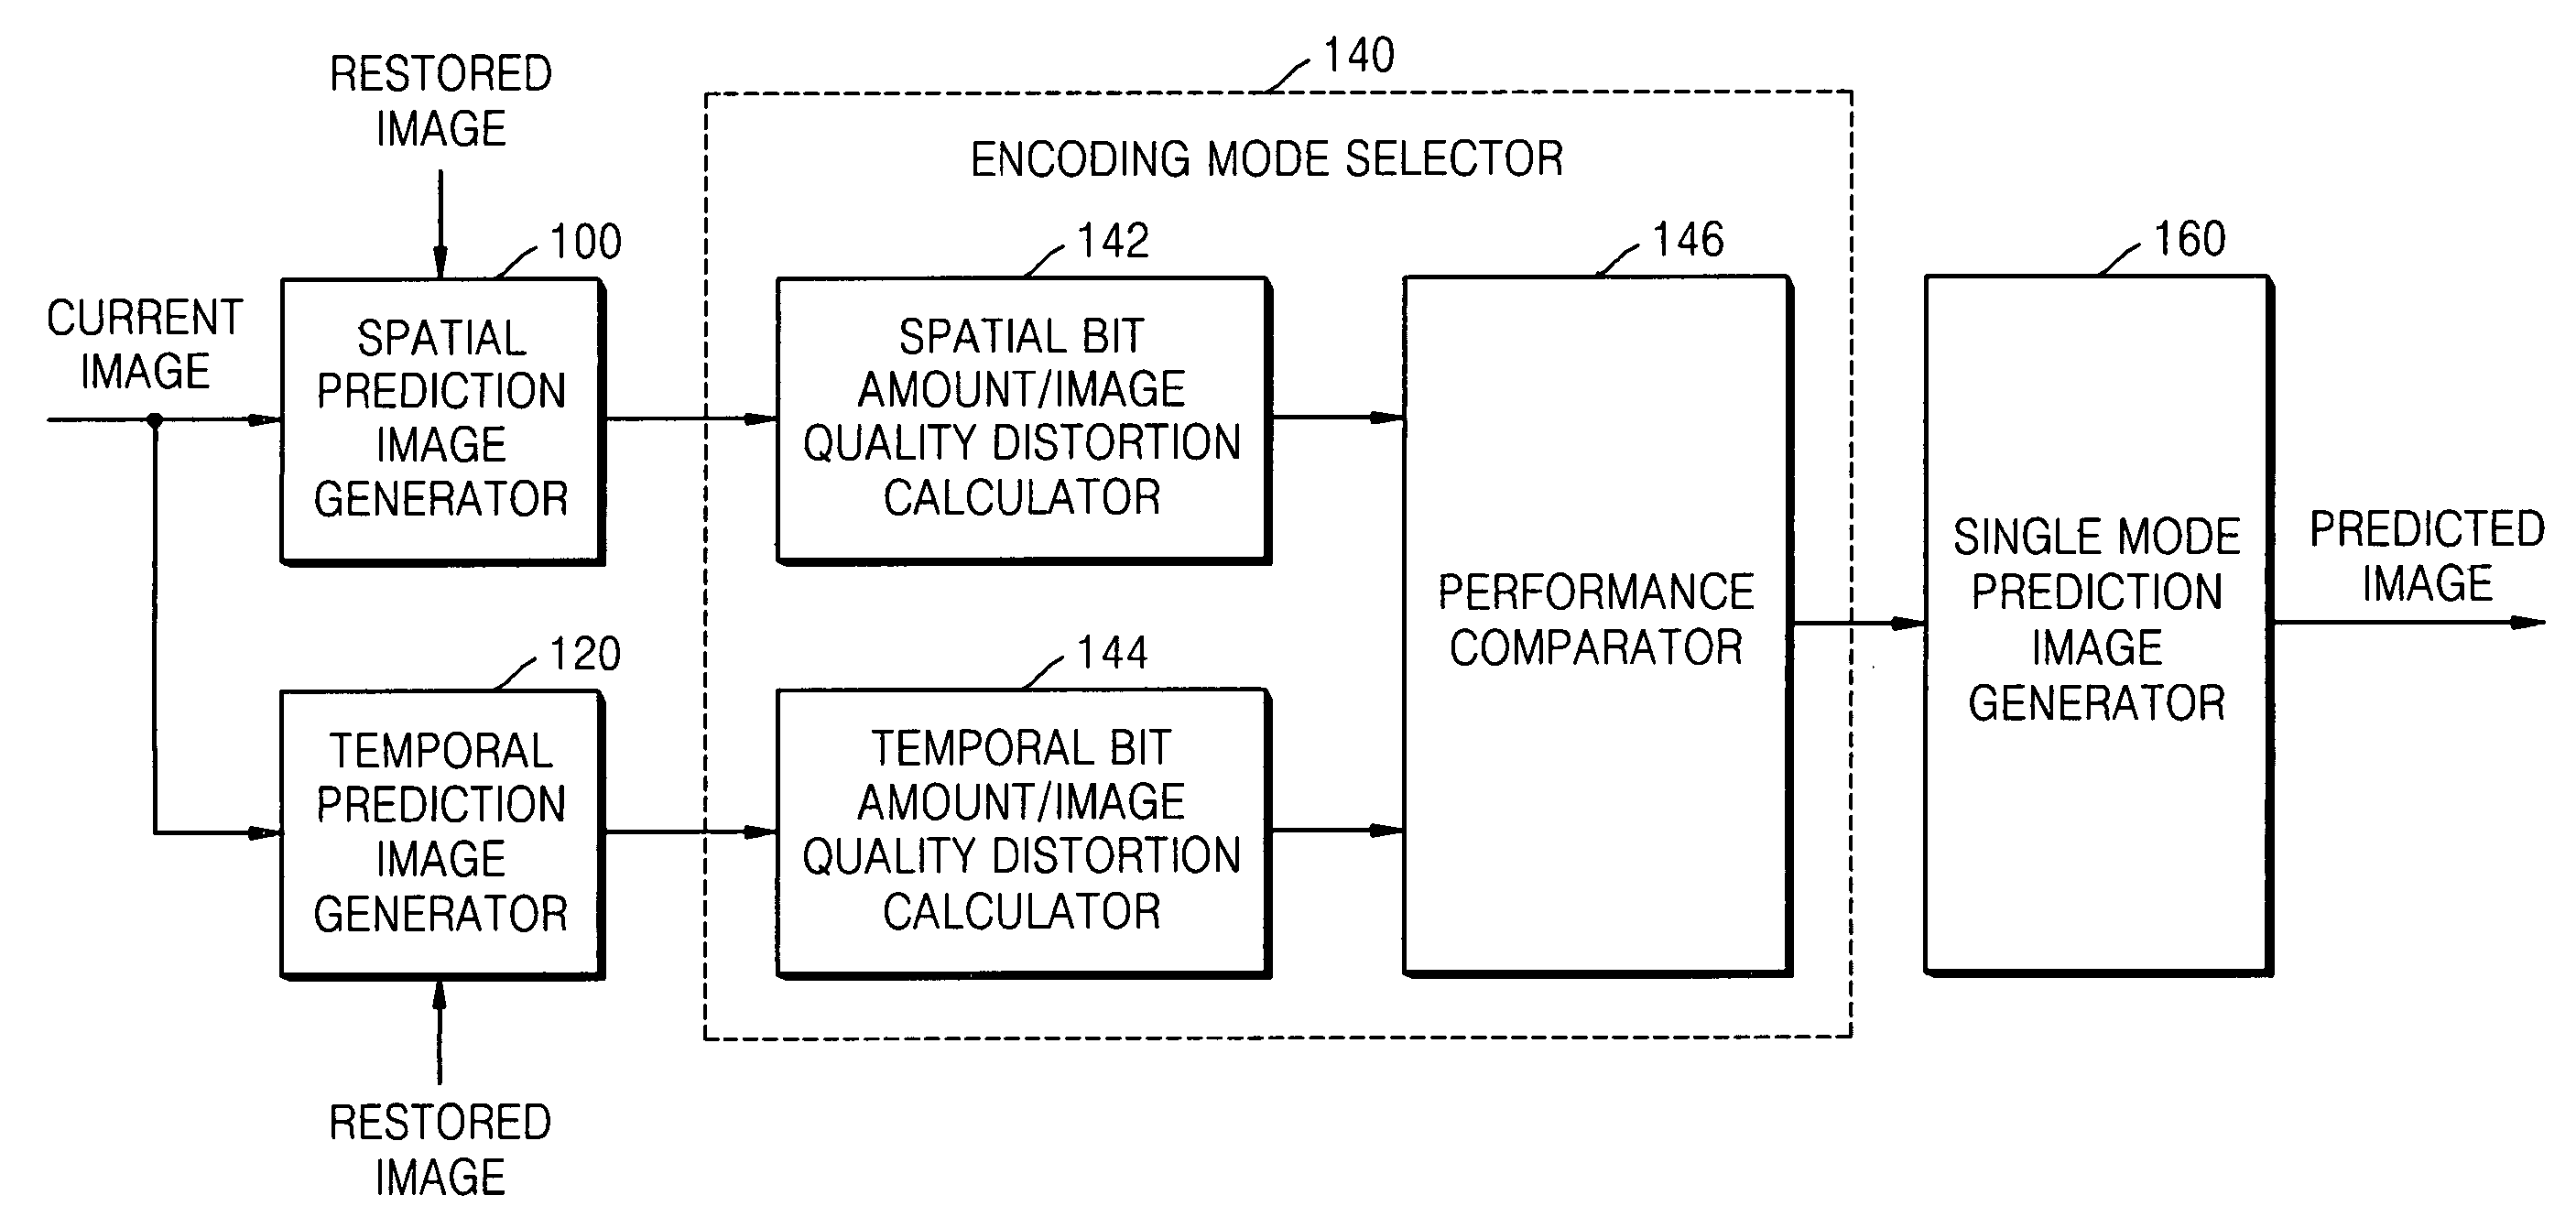 Method, medium, and apparatus encoding and/or decoding an image using the same coding mode across components